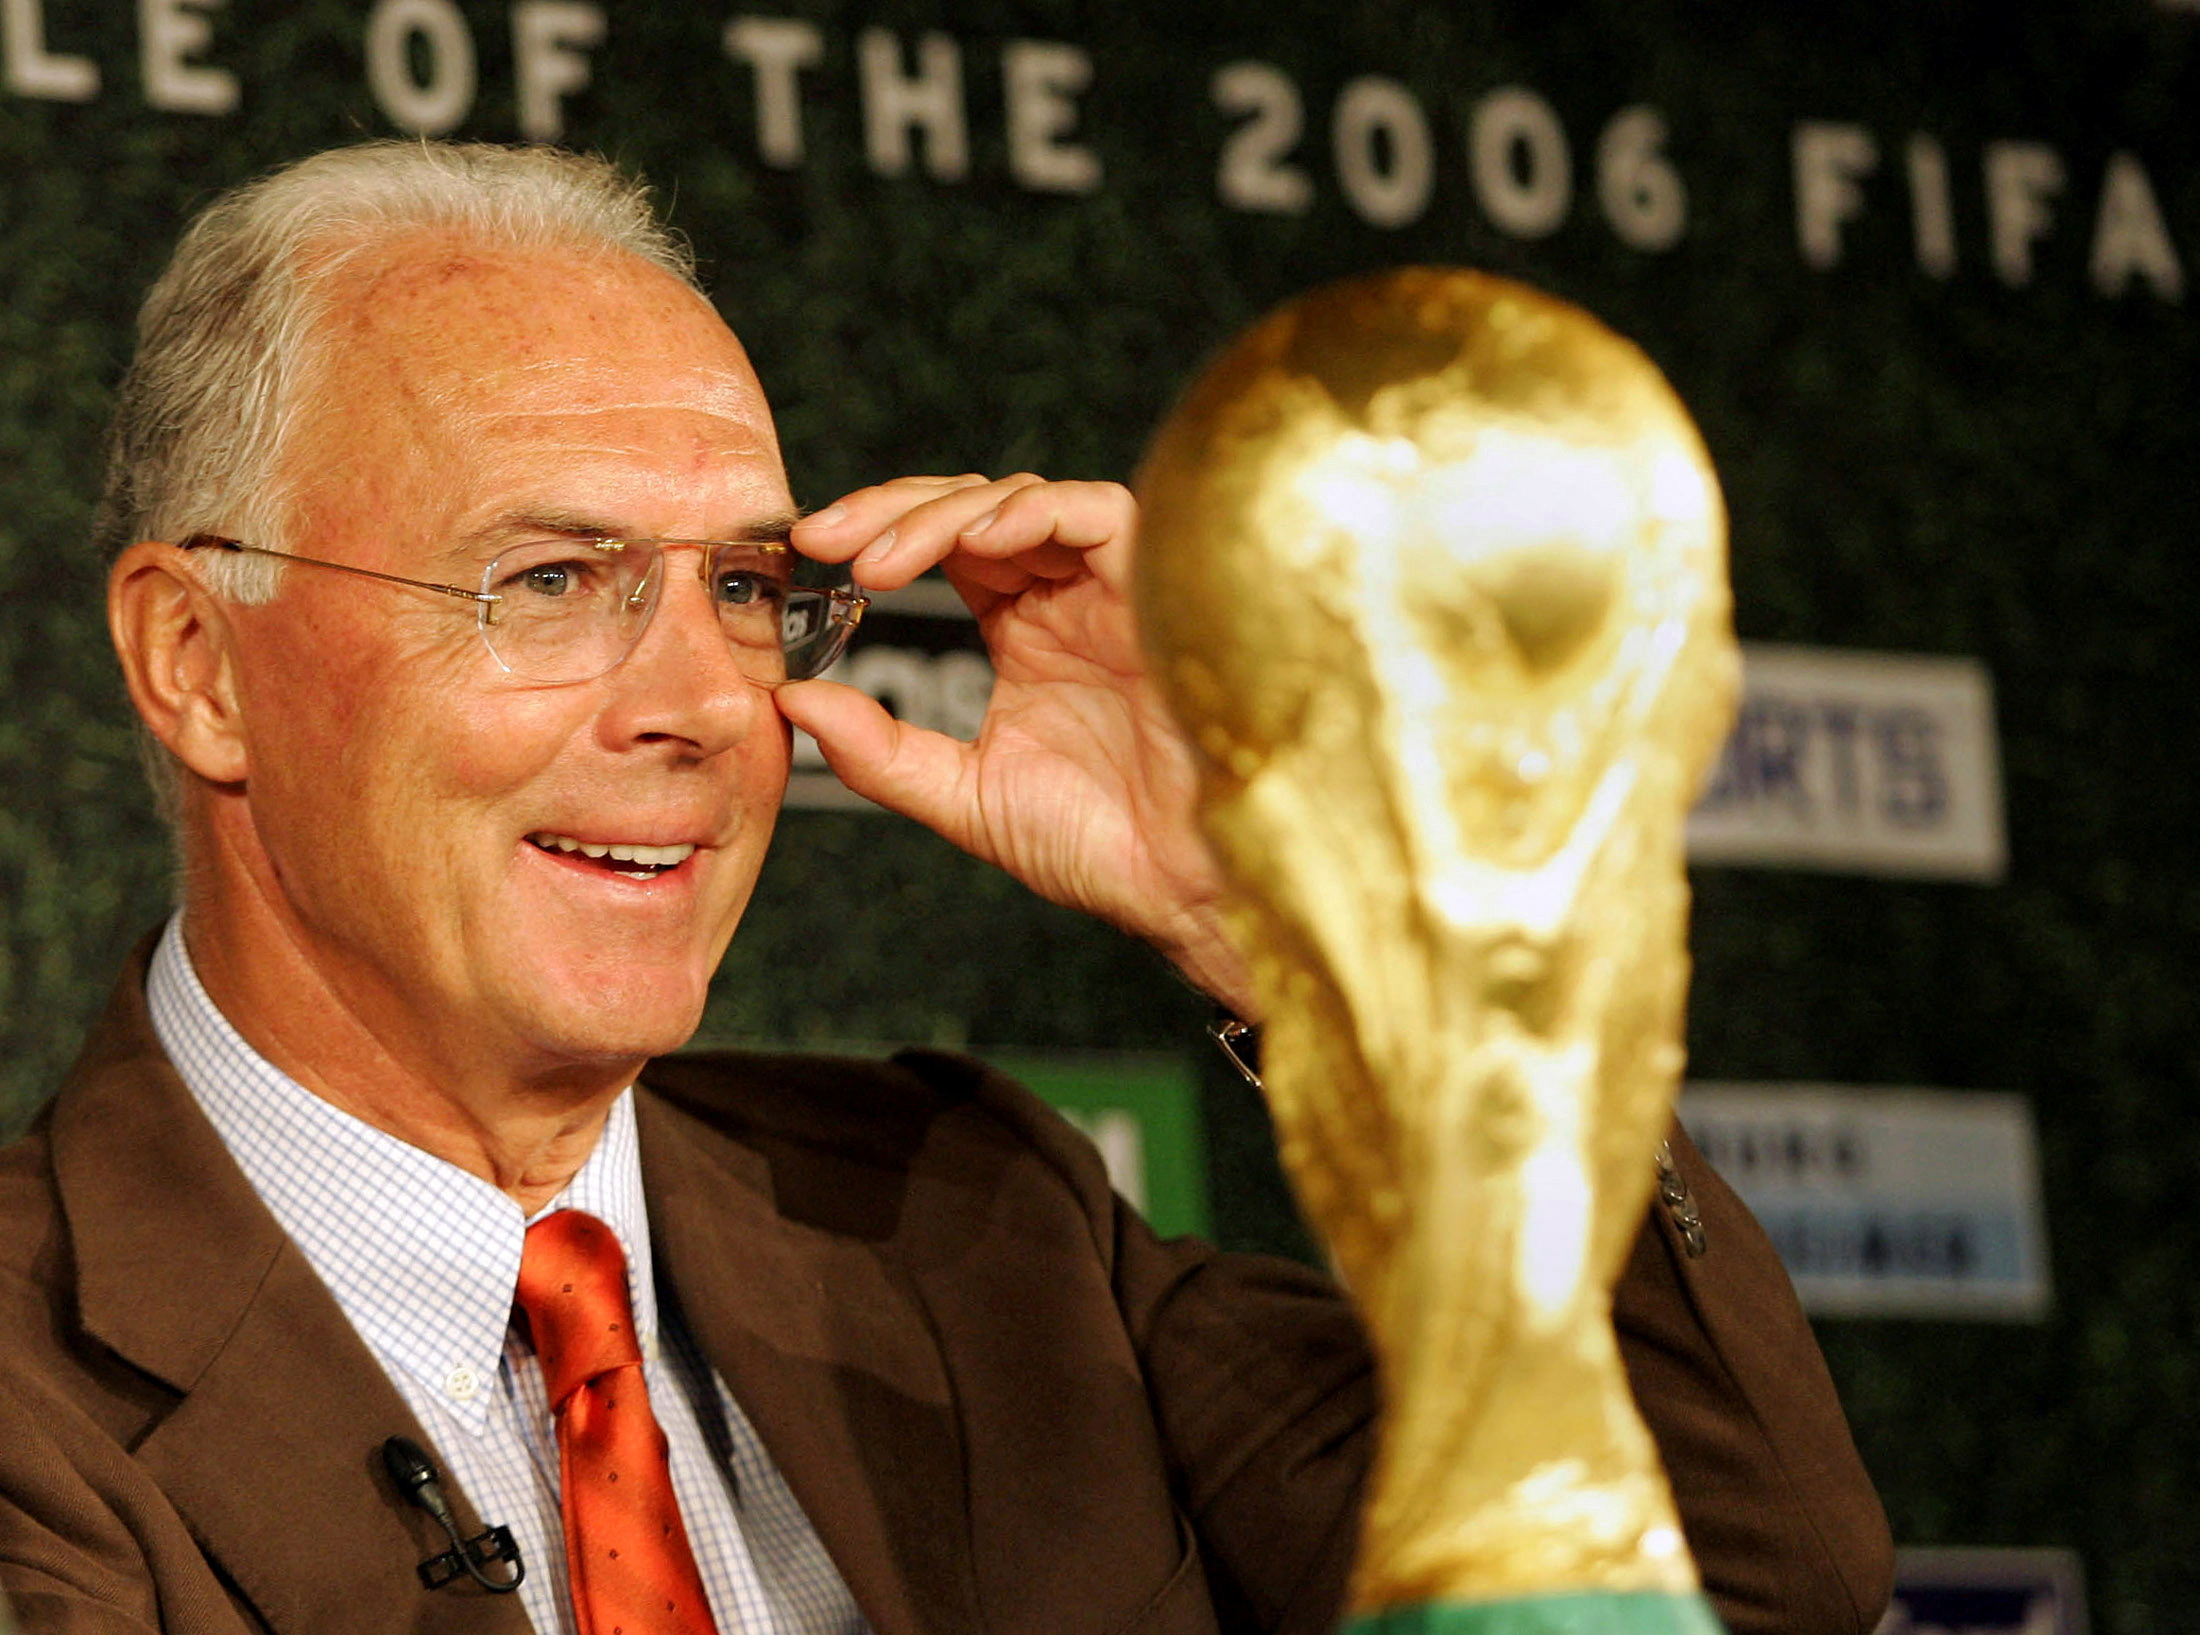 Franz Beckenbauer looks at the soccer world cup trophy during a news conference in Berlin.